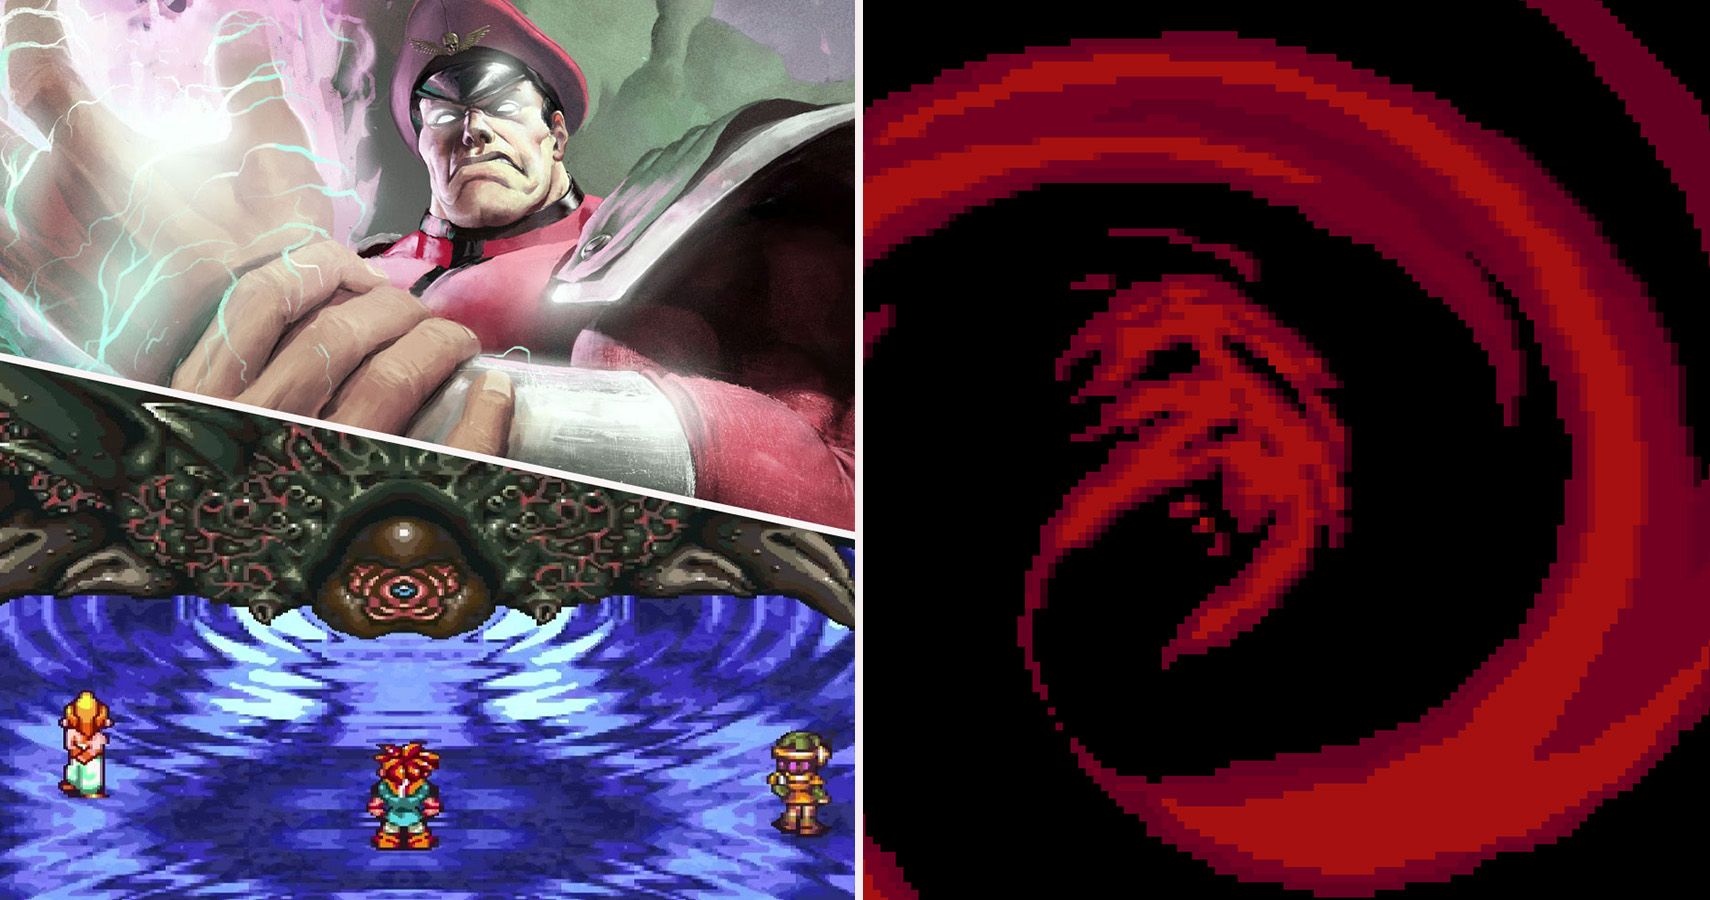 The 15 Hardest Bosses In Classic Video Games (And The 10 Easiest)